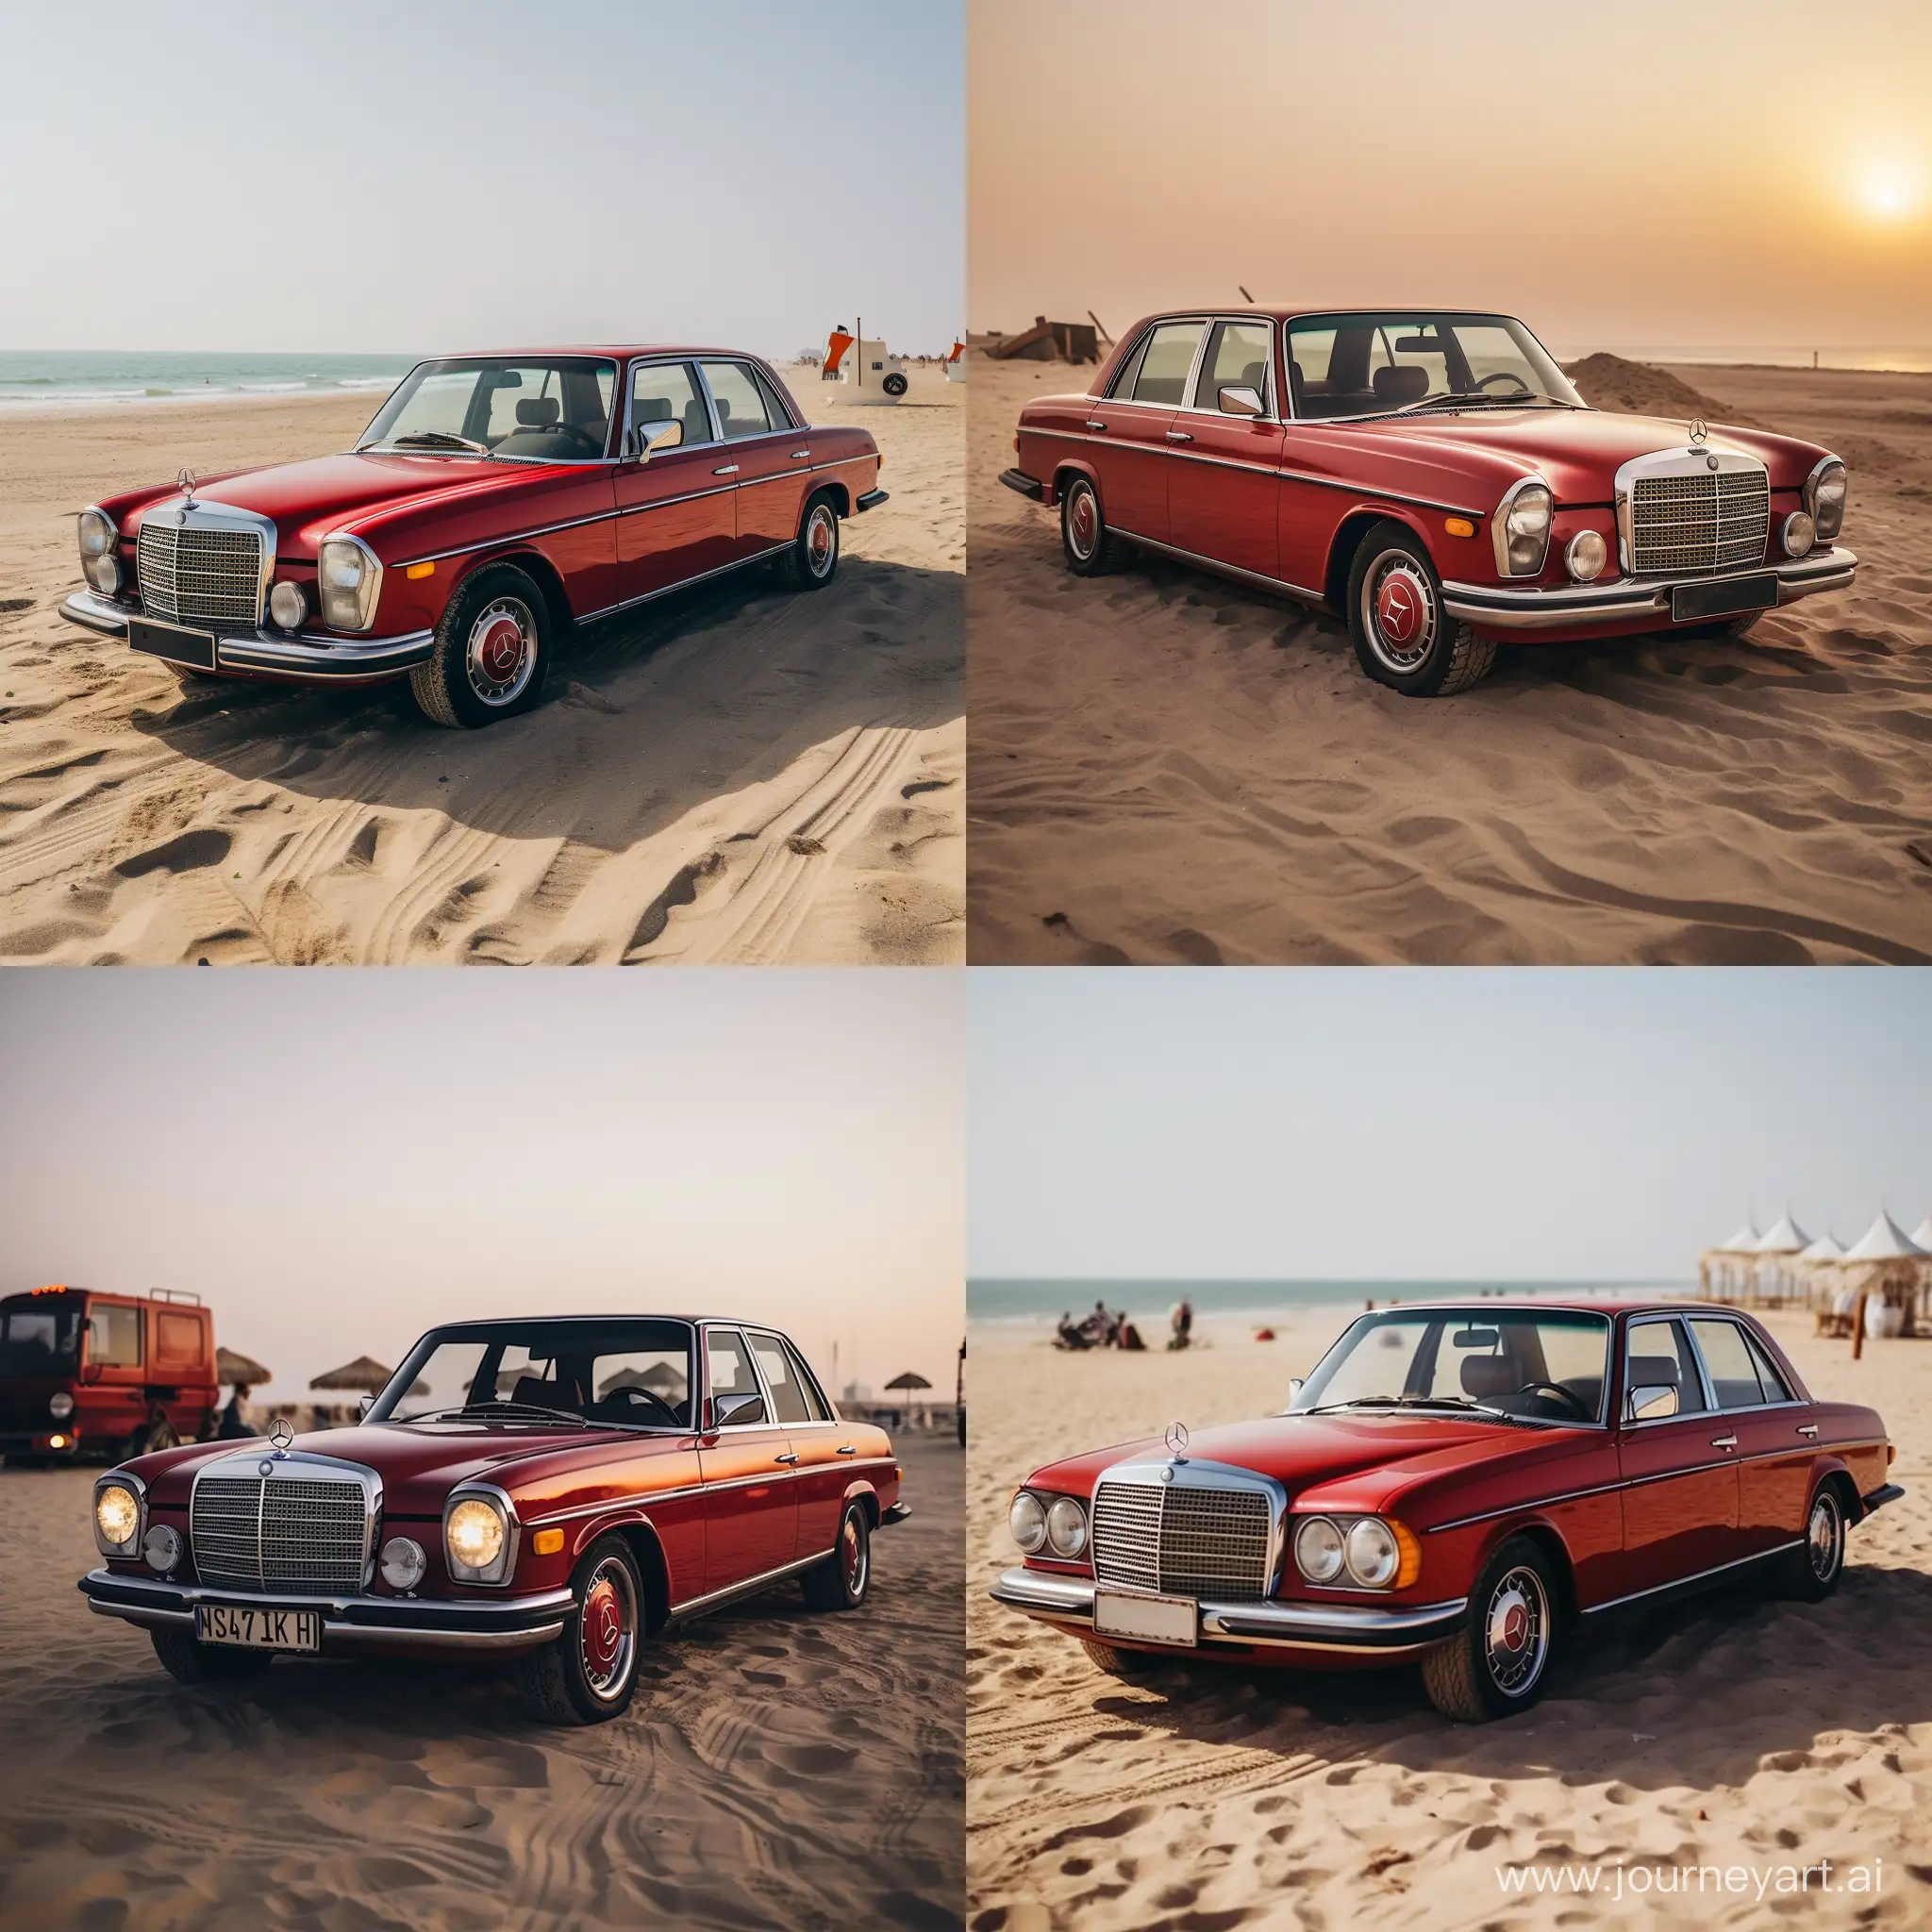 old red mercedes w123 on the beach in Dubai